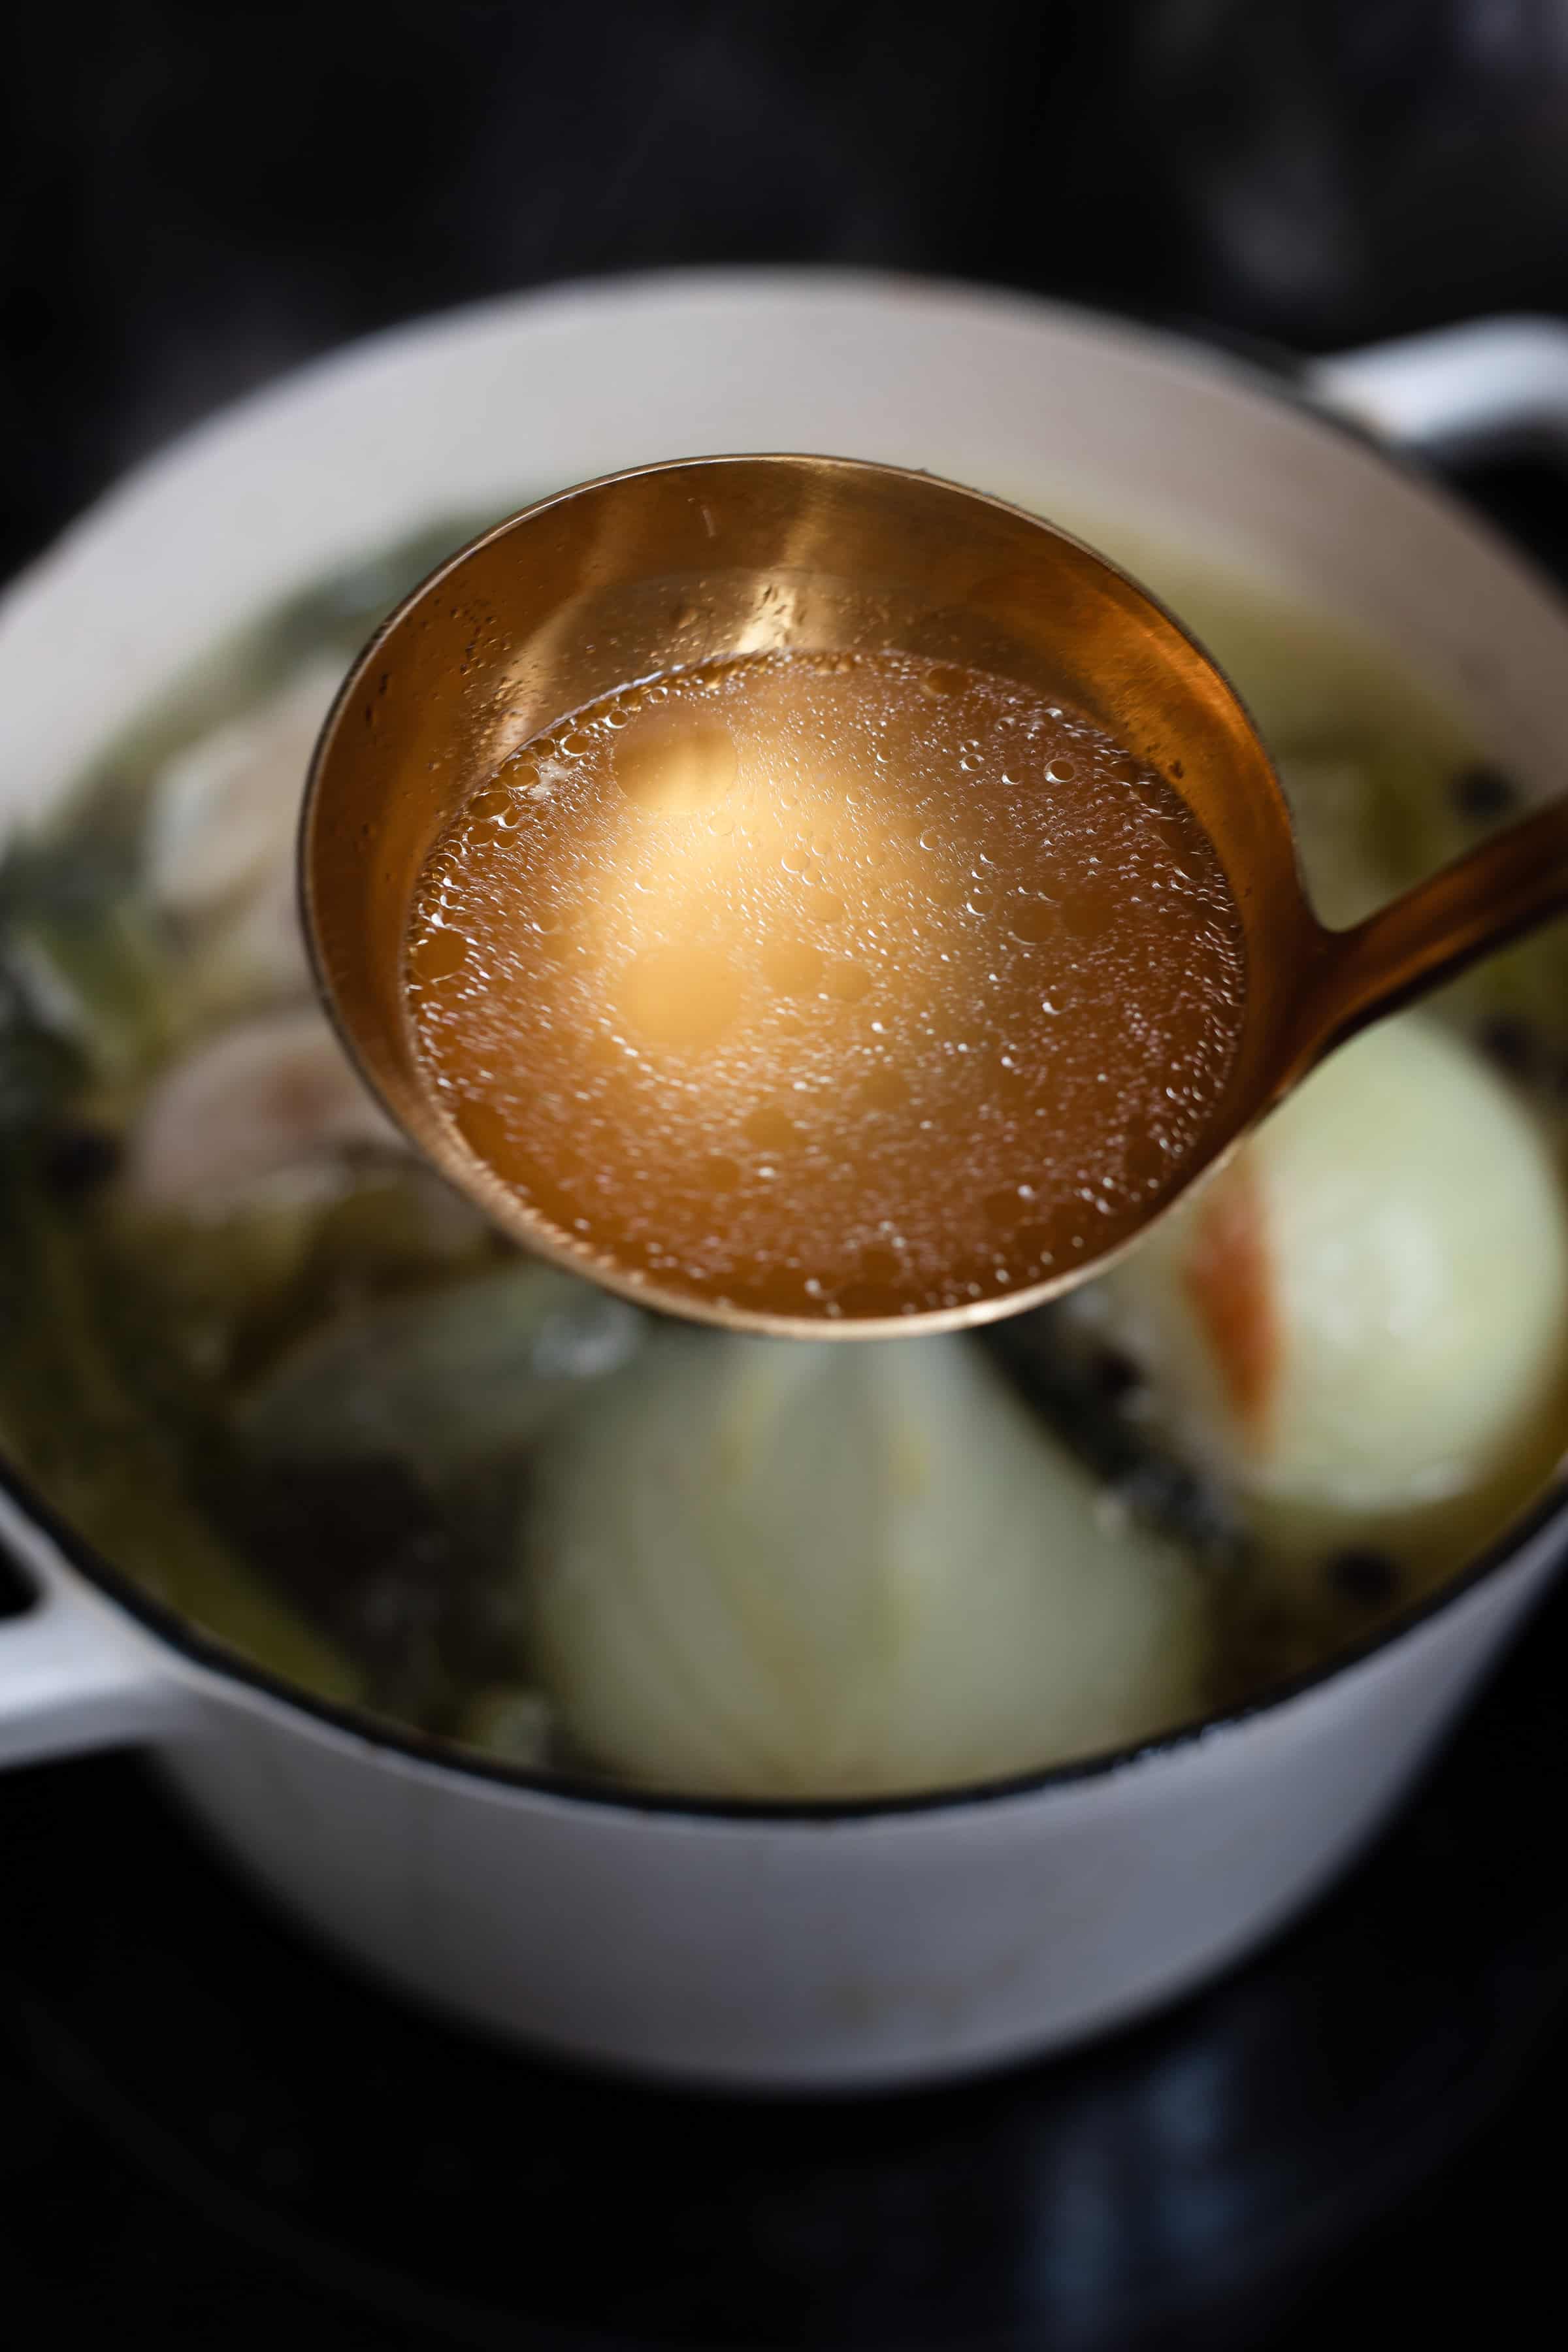 A ladle is being used to scoop broth from a pot containing onions and herbs, demonstrating the preparation of a soup.